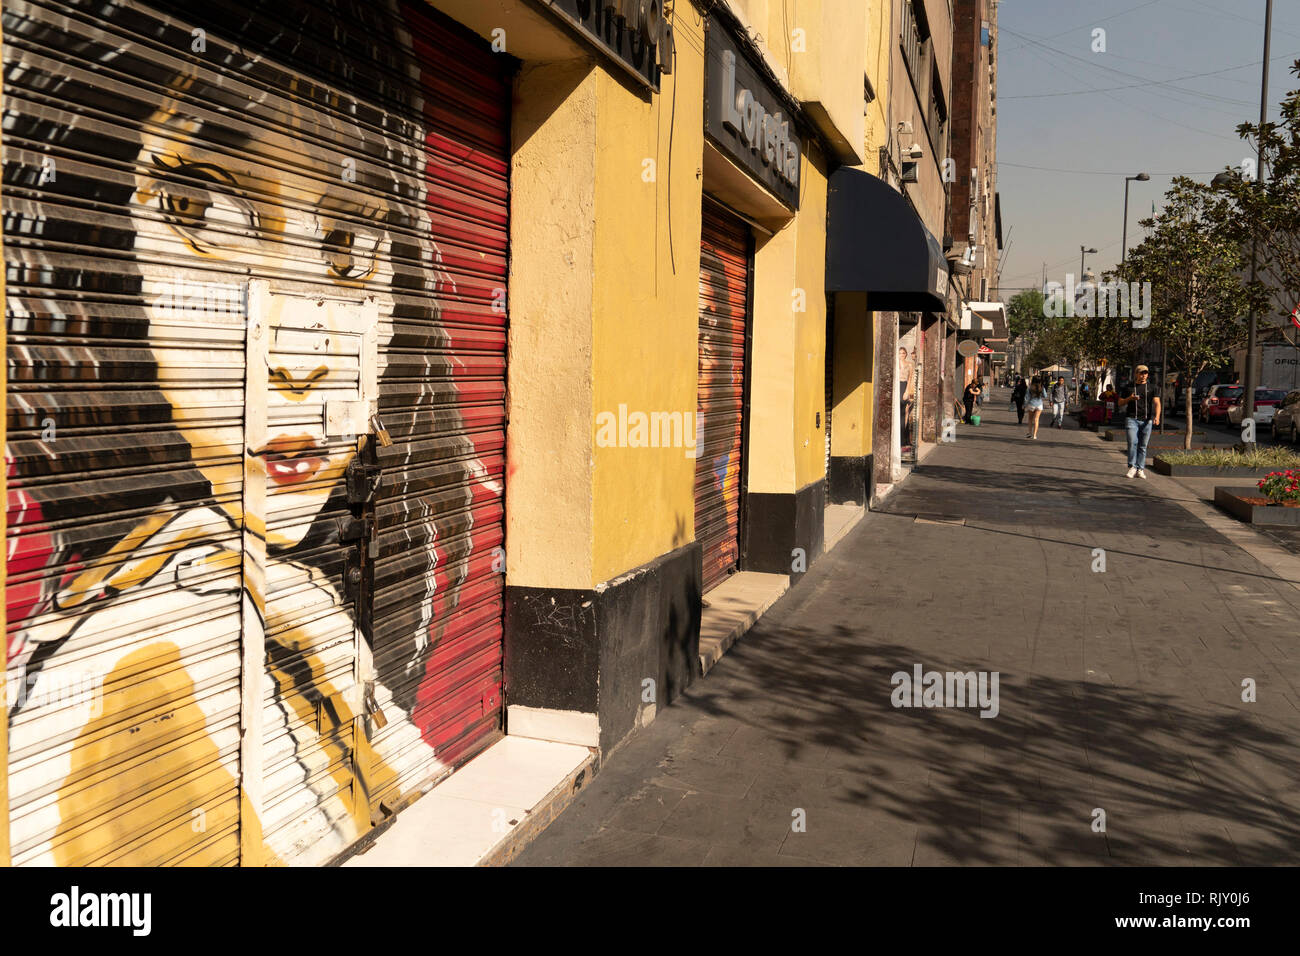 MEXICO CITY, MEXICO - JANUARY 30 2019 - All the shops rolli down gates have graffiti in 20 november business street. Art is all over the capital, and  Stock Photo